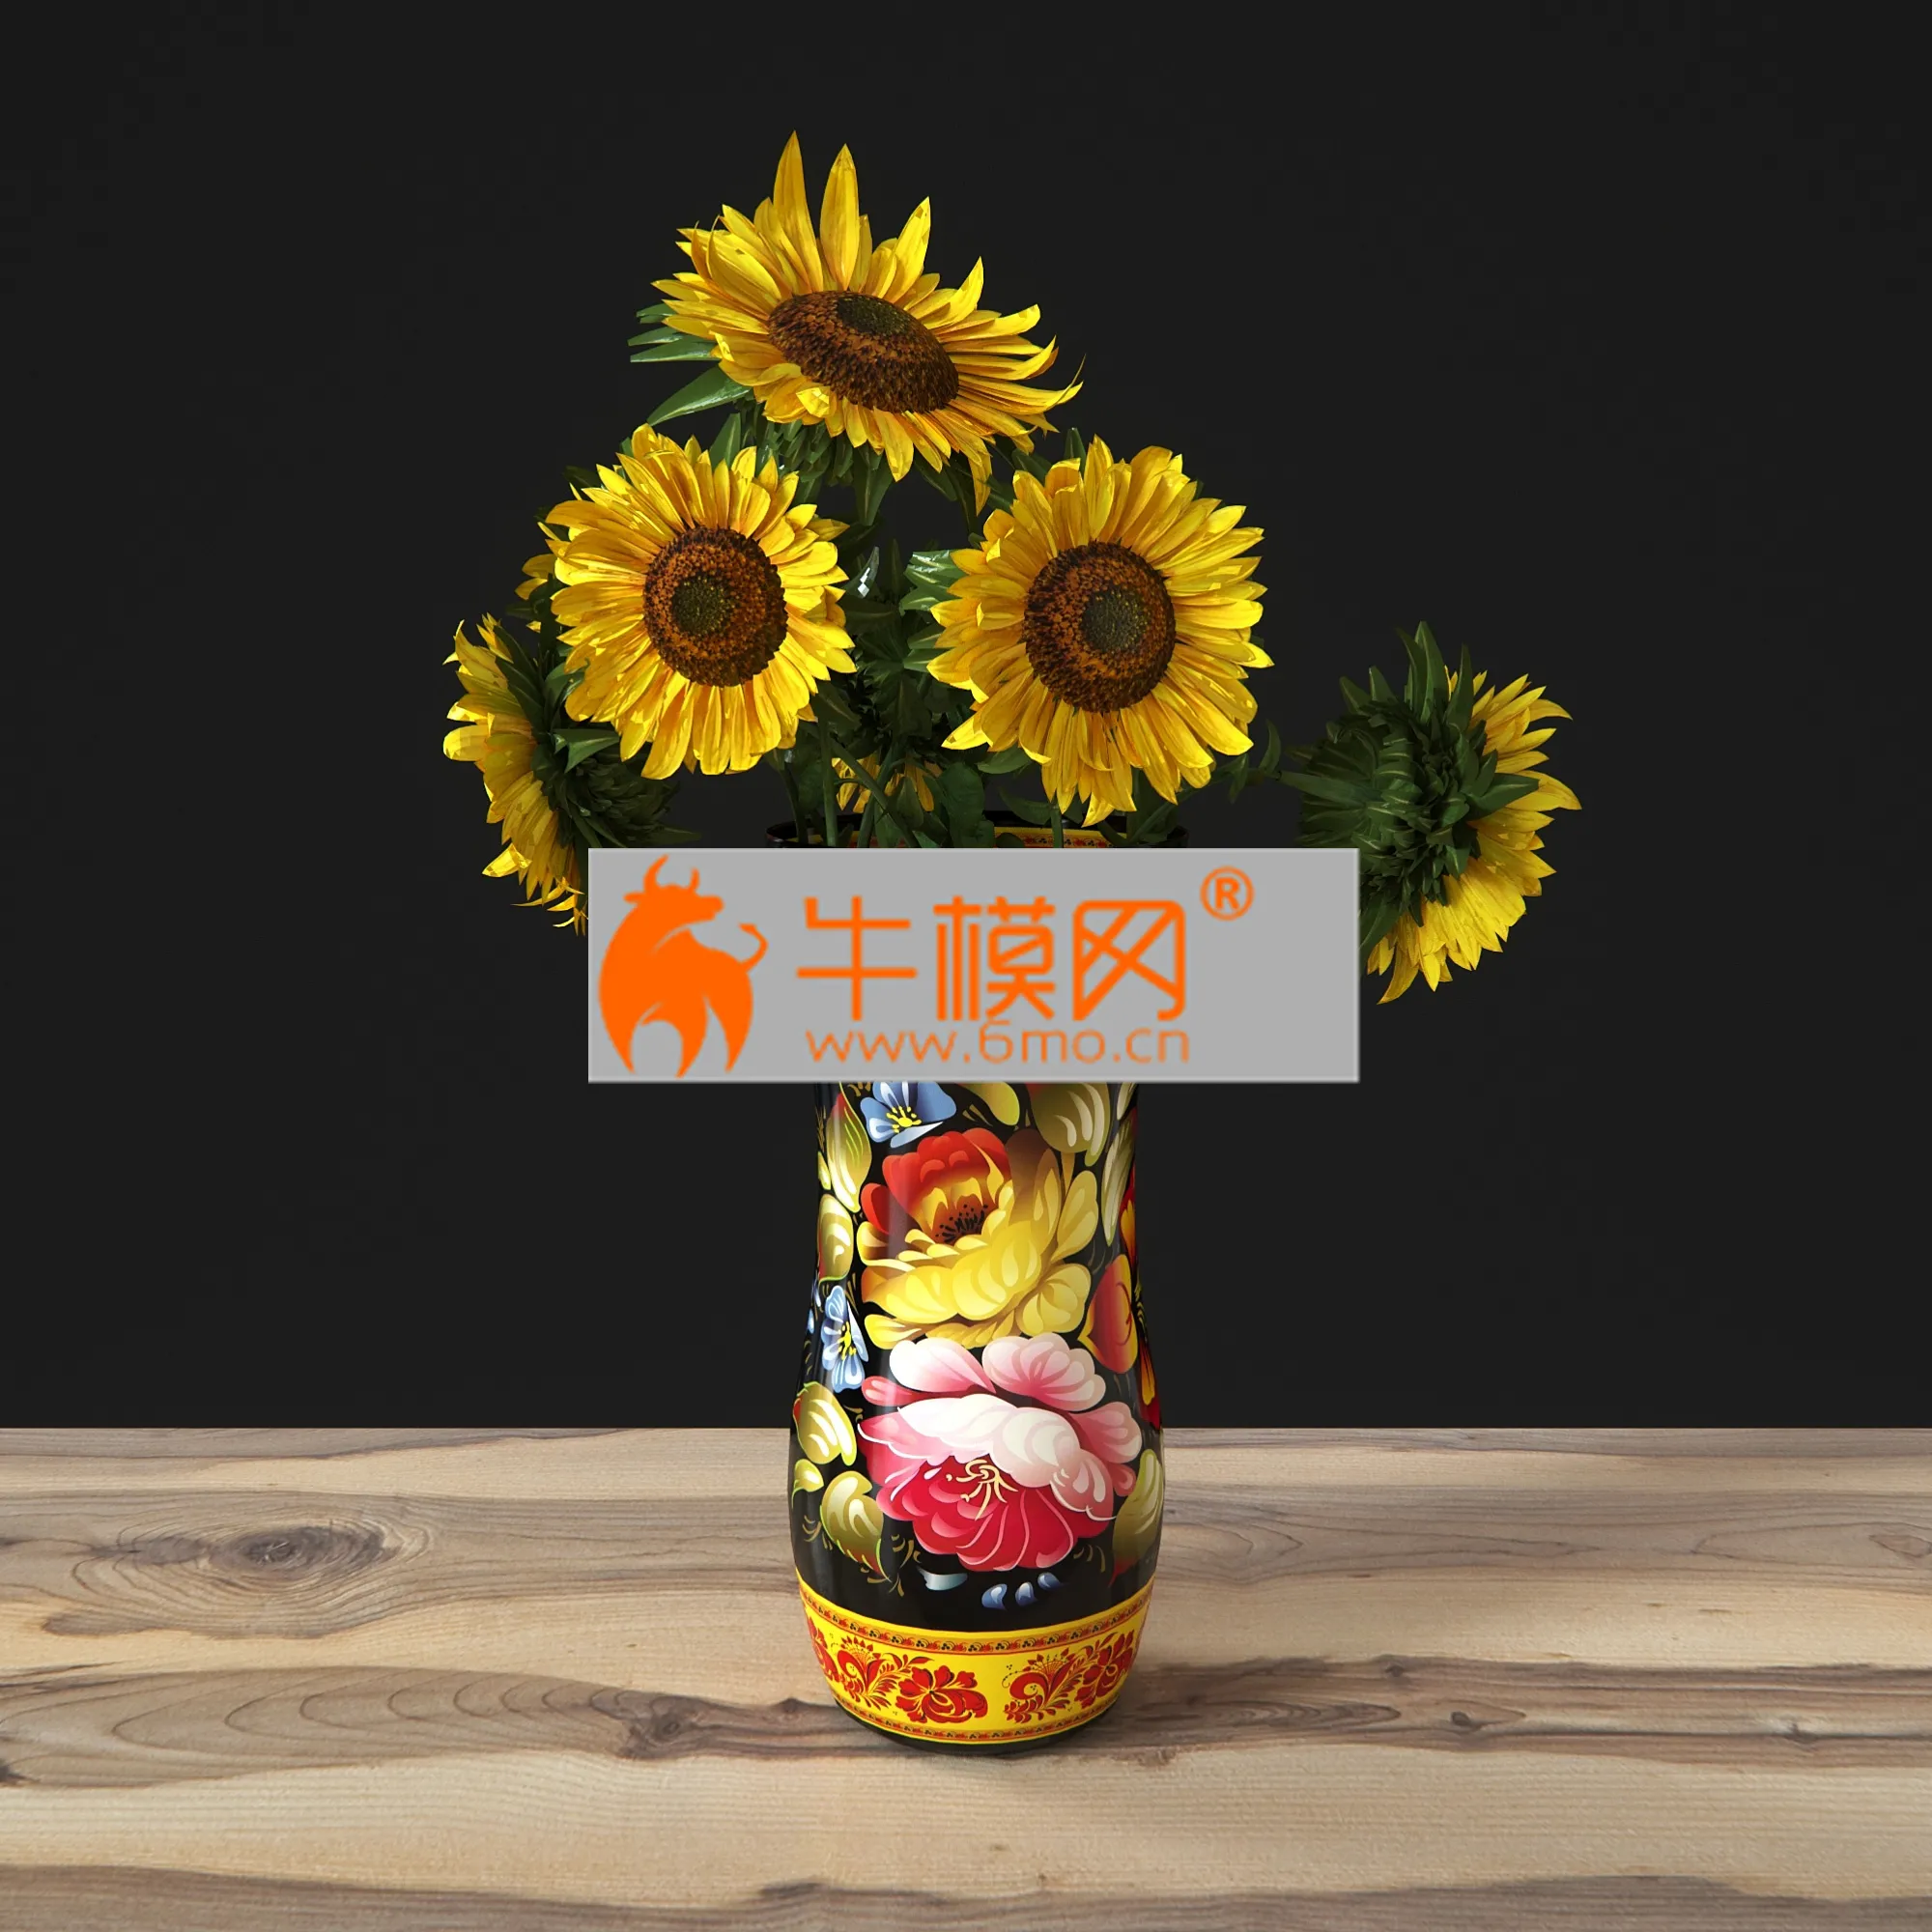 Sunflowers in a vase – 5004